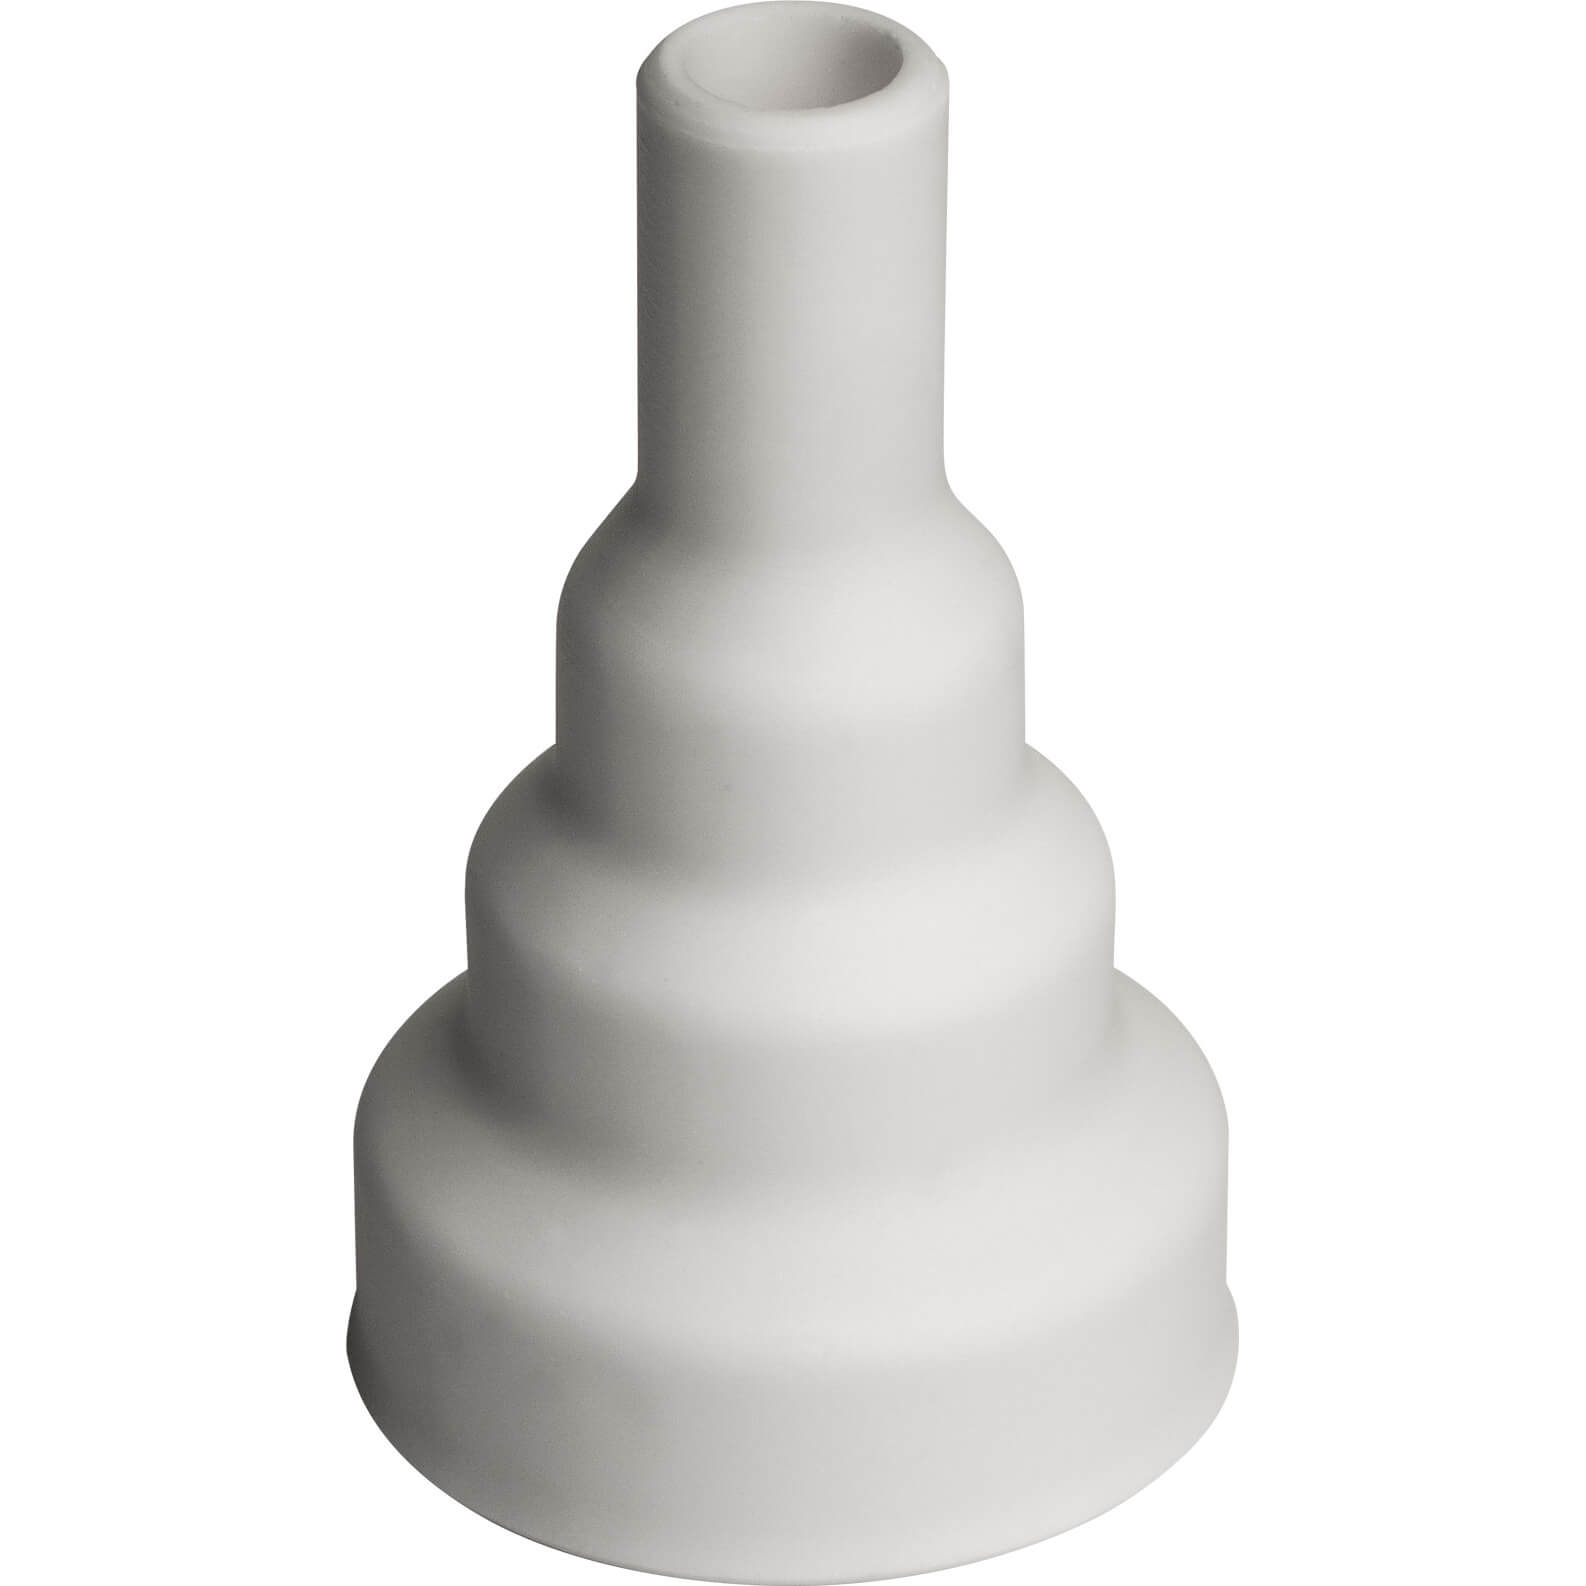 Image of Steinel Ceramic Nozzle for HL Models and HG 2120 E, 2320 E and 2220 E 9mm